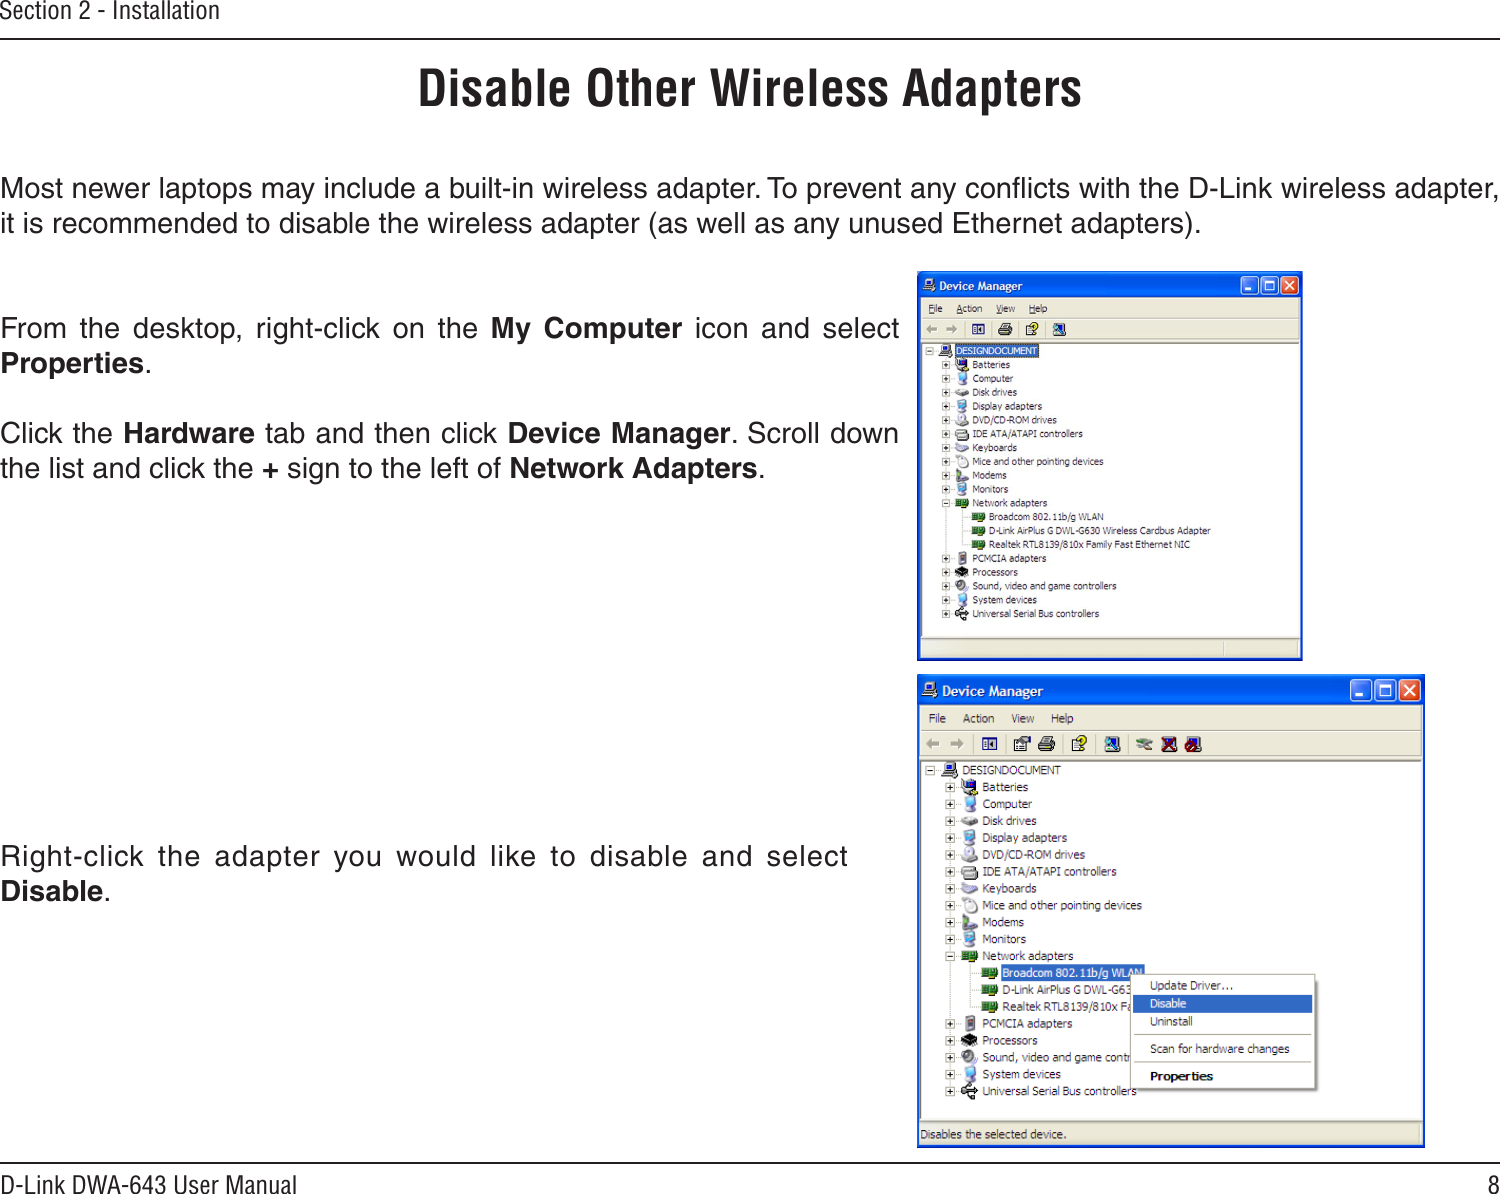 8D-Link DWA-643 User ManualSection 2 - InstallationDisable Other Wireless AdaptersMost newer laptops may include a built-in wireless adapter. To prevent any conﬂicts with the D-Link wireless adapter, it is recommended to disable the wireless adapter (as well as any unused Ethernet adapters).From  the  desktop,  right-click  on  the  My  Computer  icon  and  select Properties. Click the Hardware tab and then click Device Manager. Scroll down the list and click the + sign to the left of Network Adapters.Right-click  the  adapter  you  would  like  to  disable  and  select Disable.